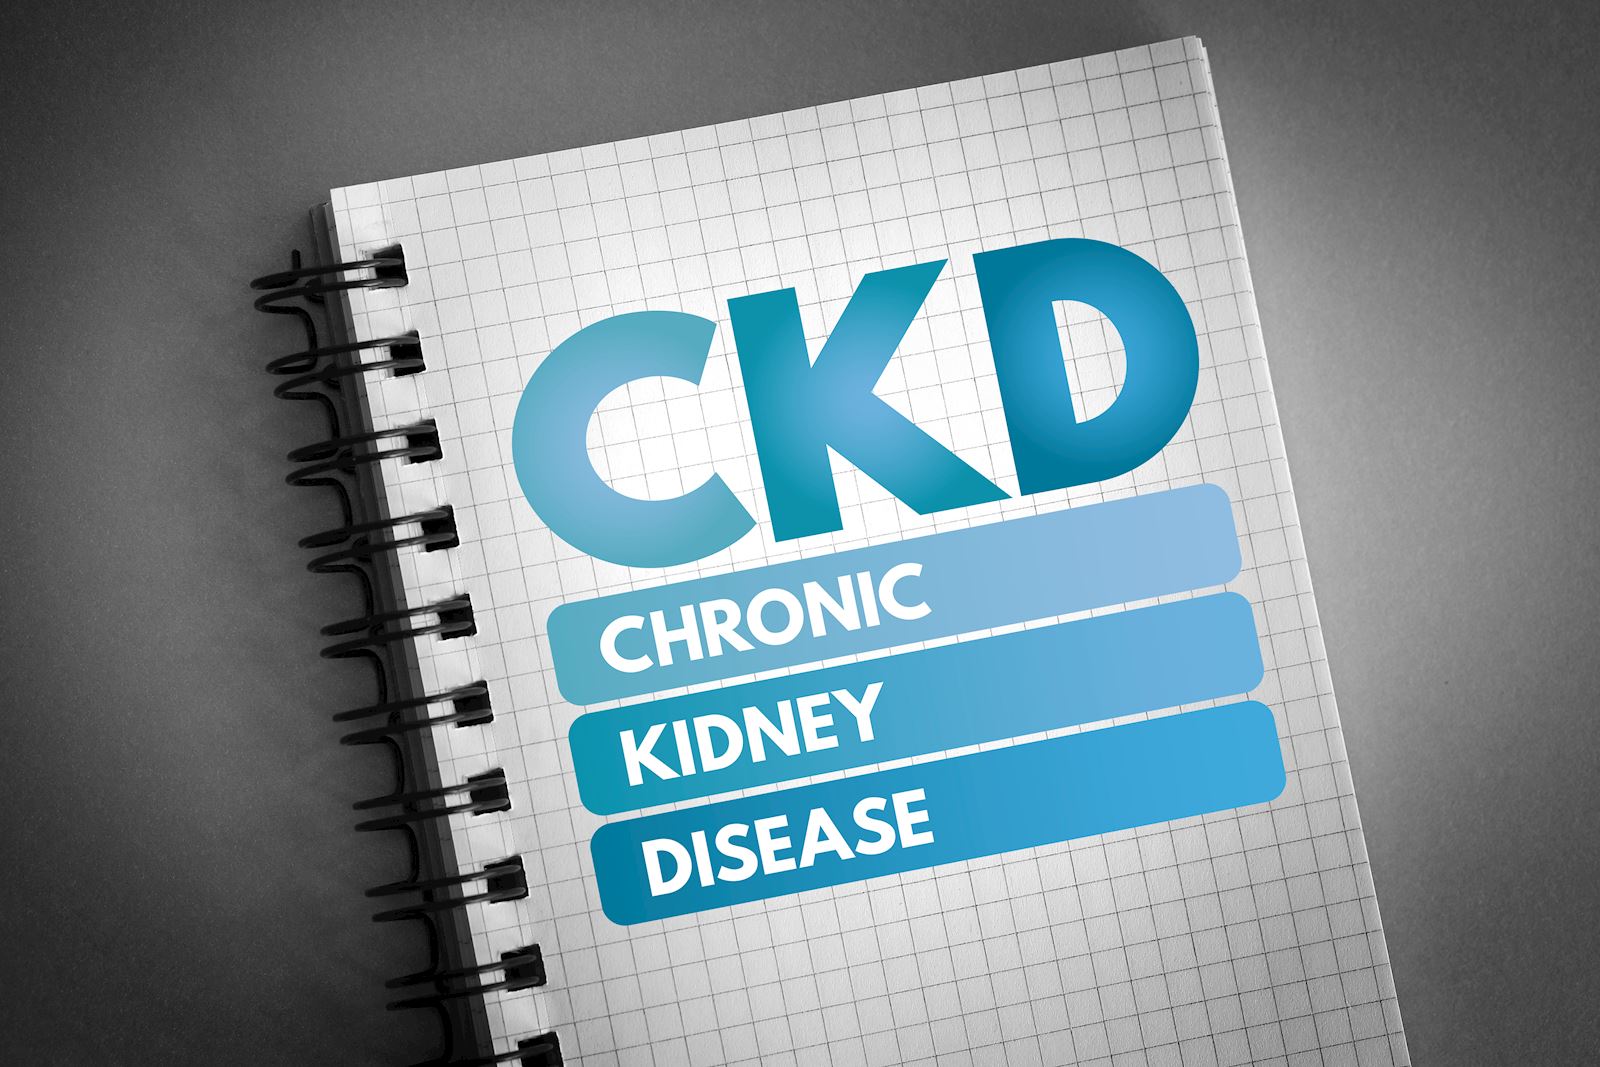 Three keys to living with CKD